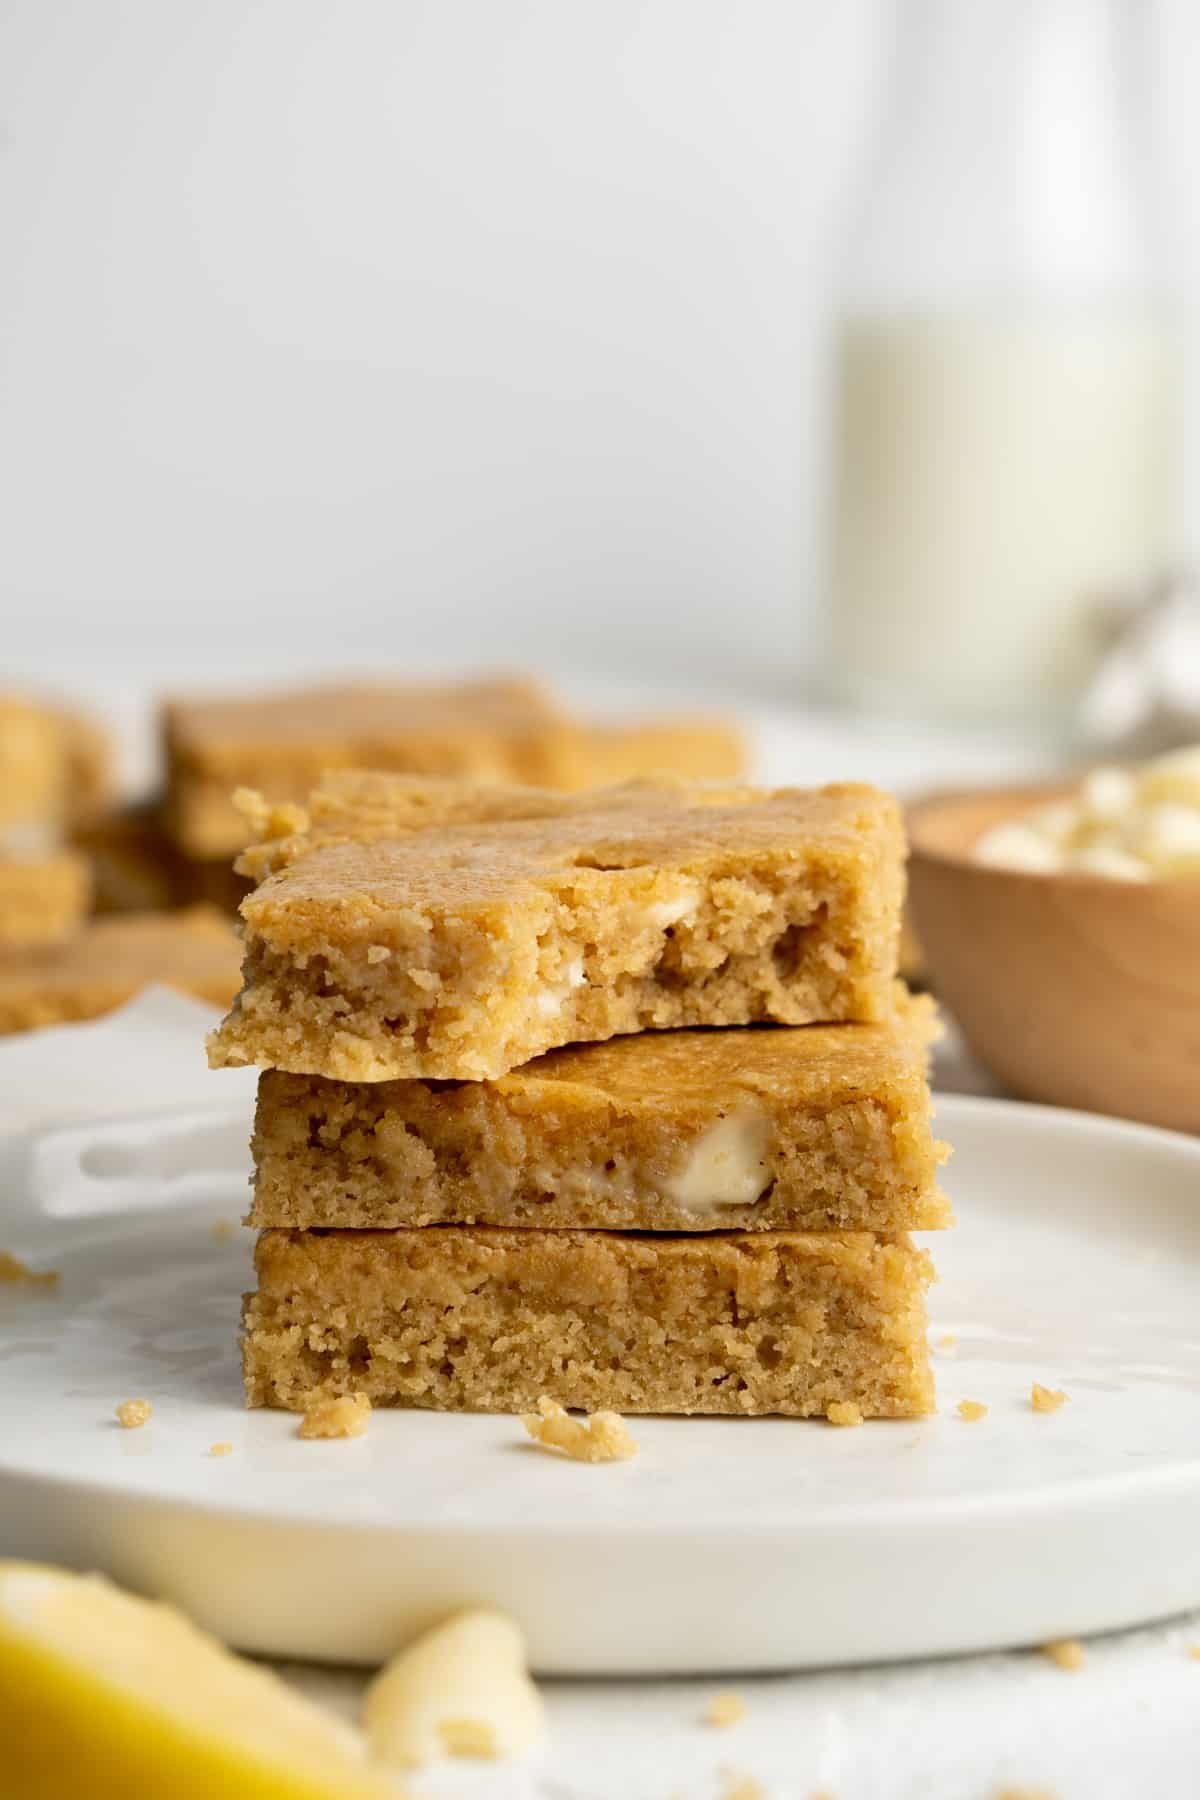 Stack of lemon blondies, one of which is missing a bite.